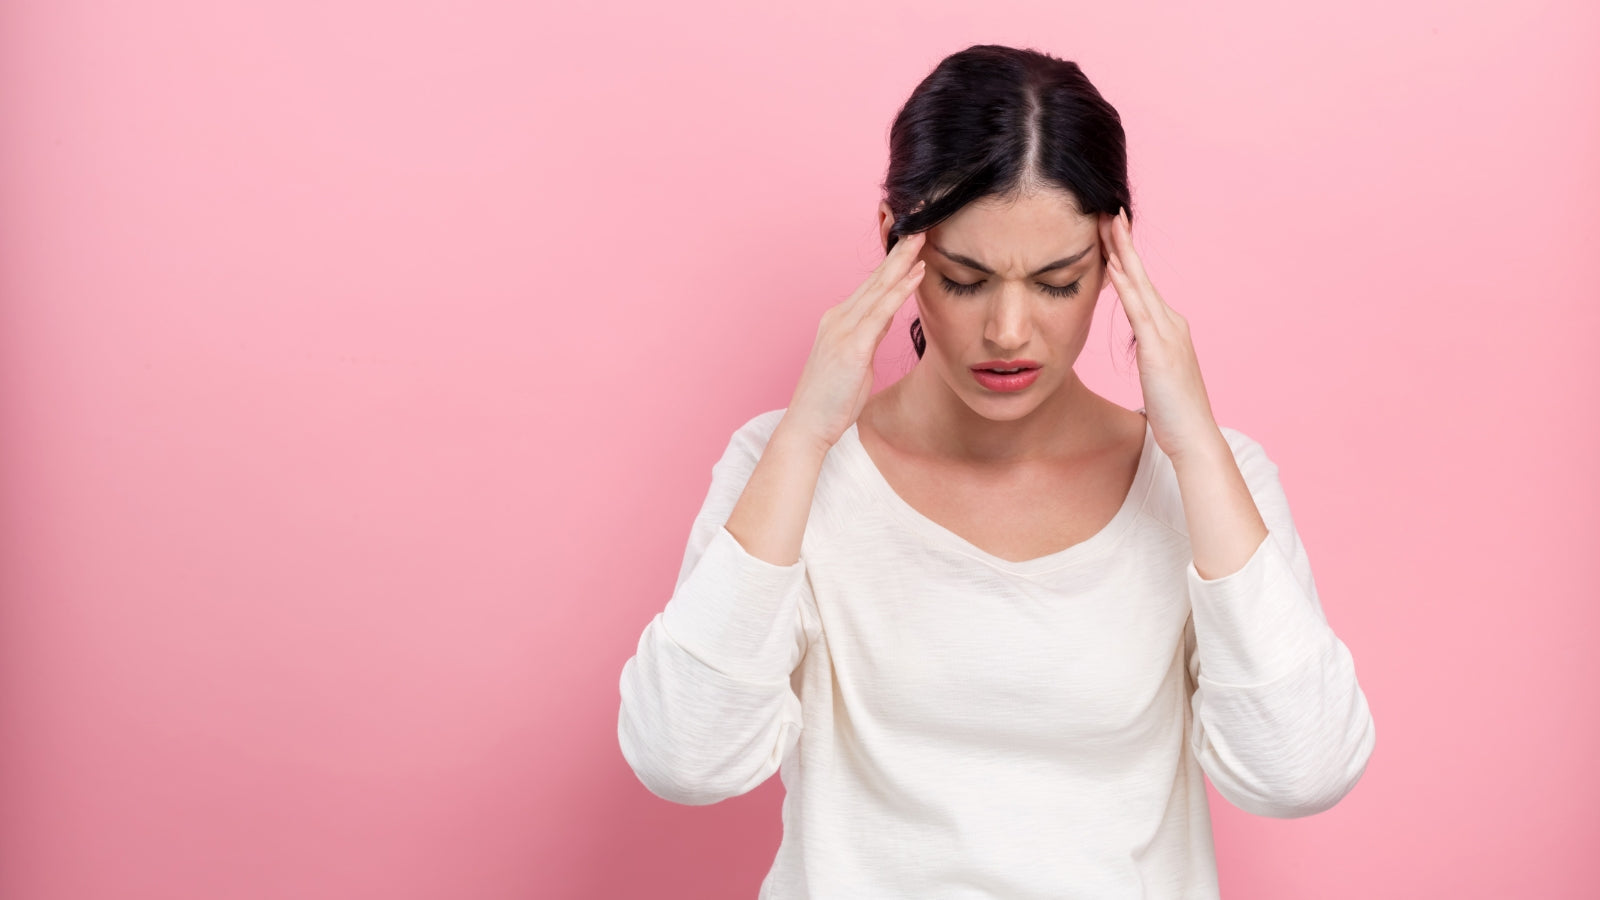 Women in a white sweater touching her head against a pink background